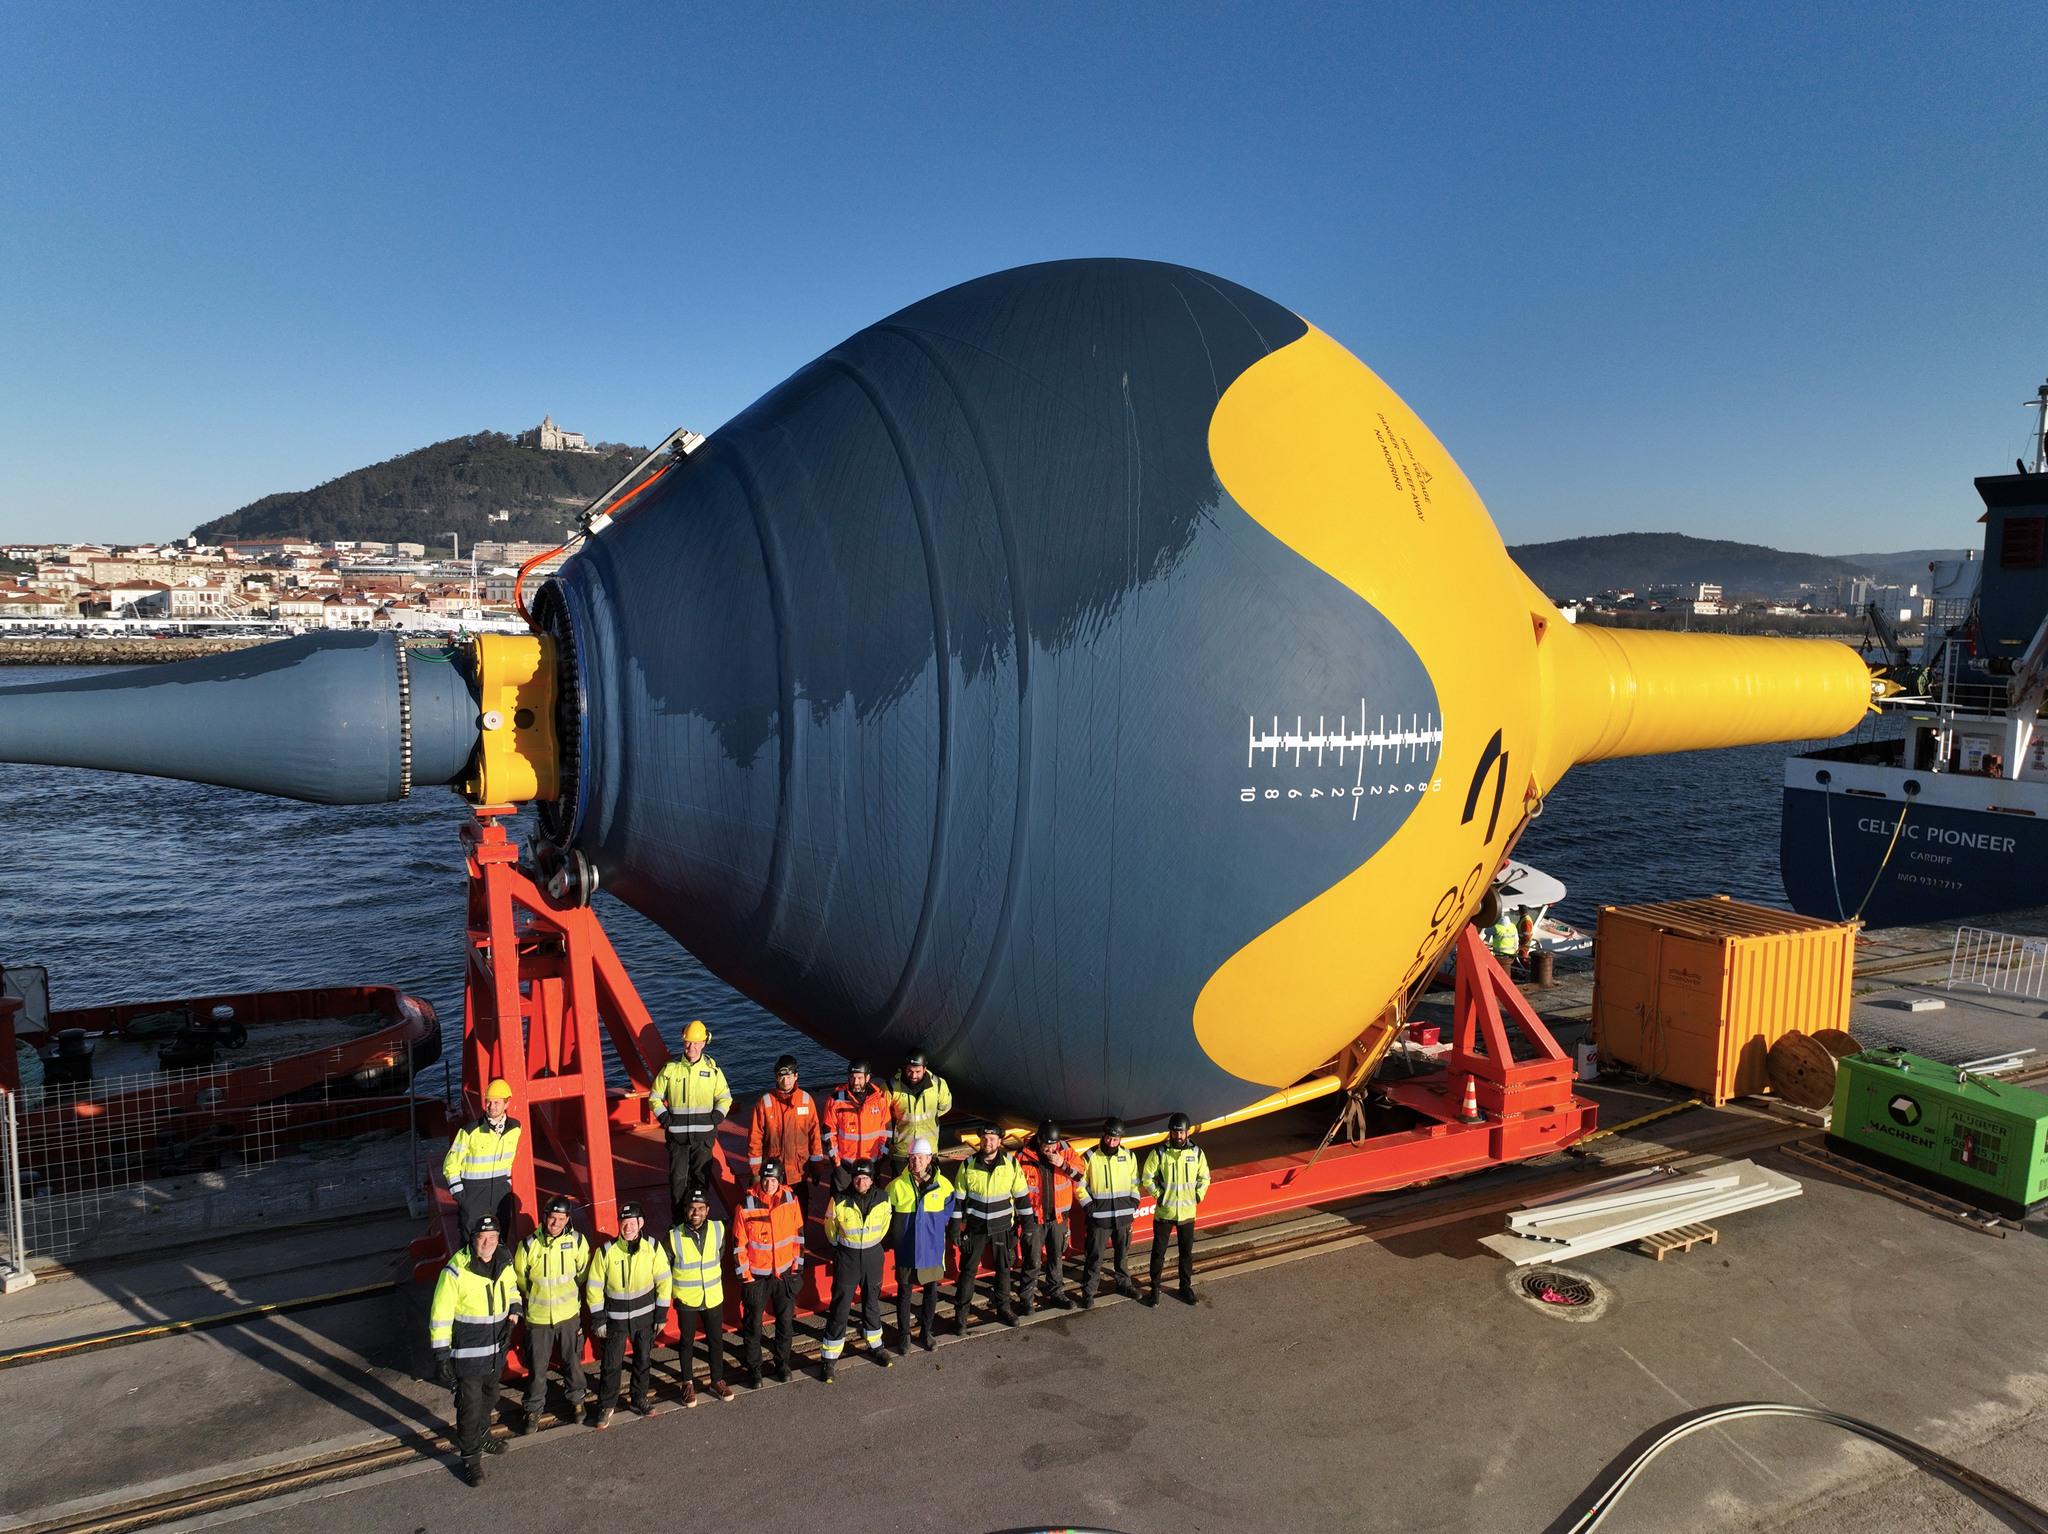 A giant buoy-shaped object lying on a quay with a group of people standing in front of it.